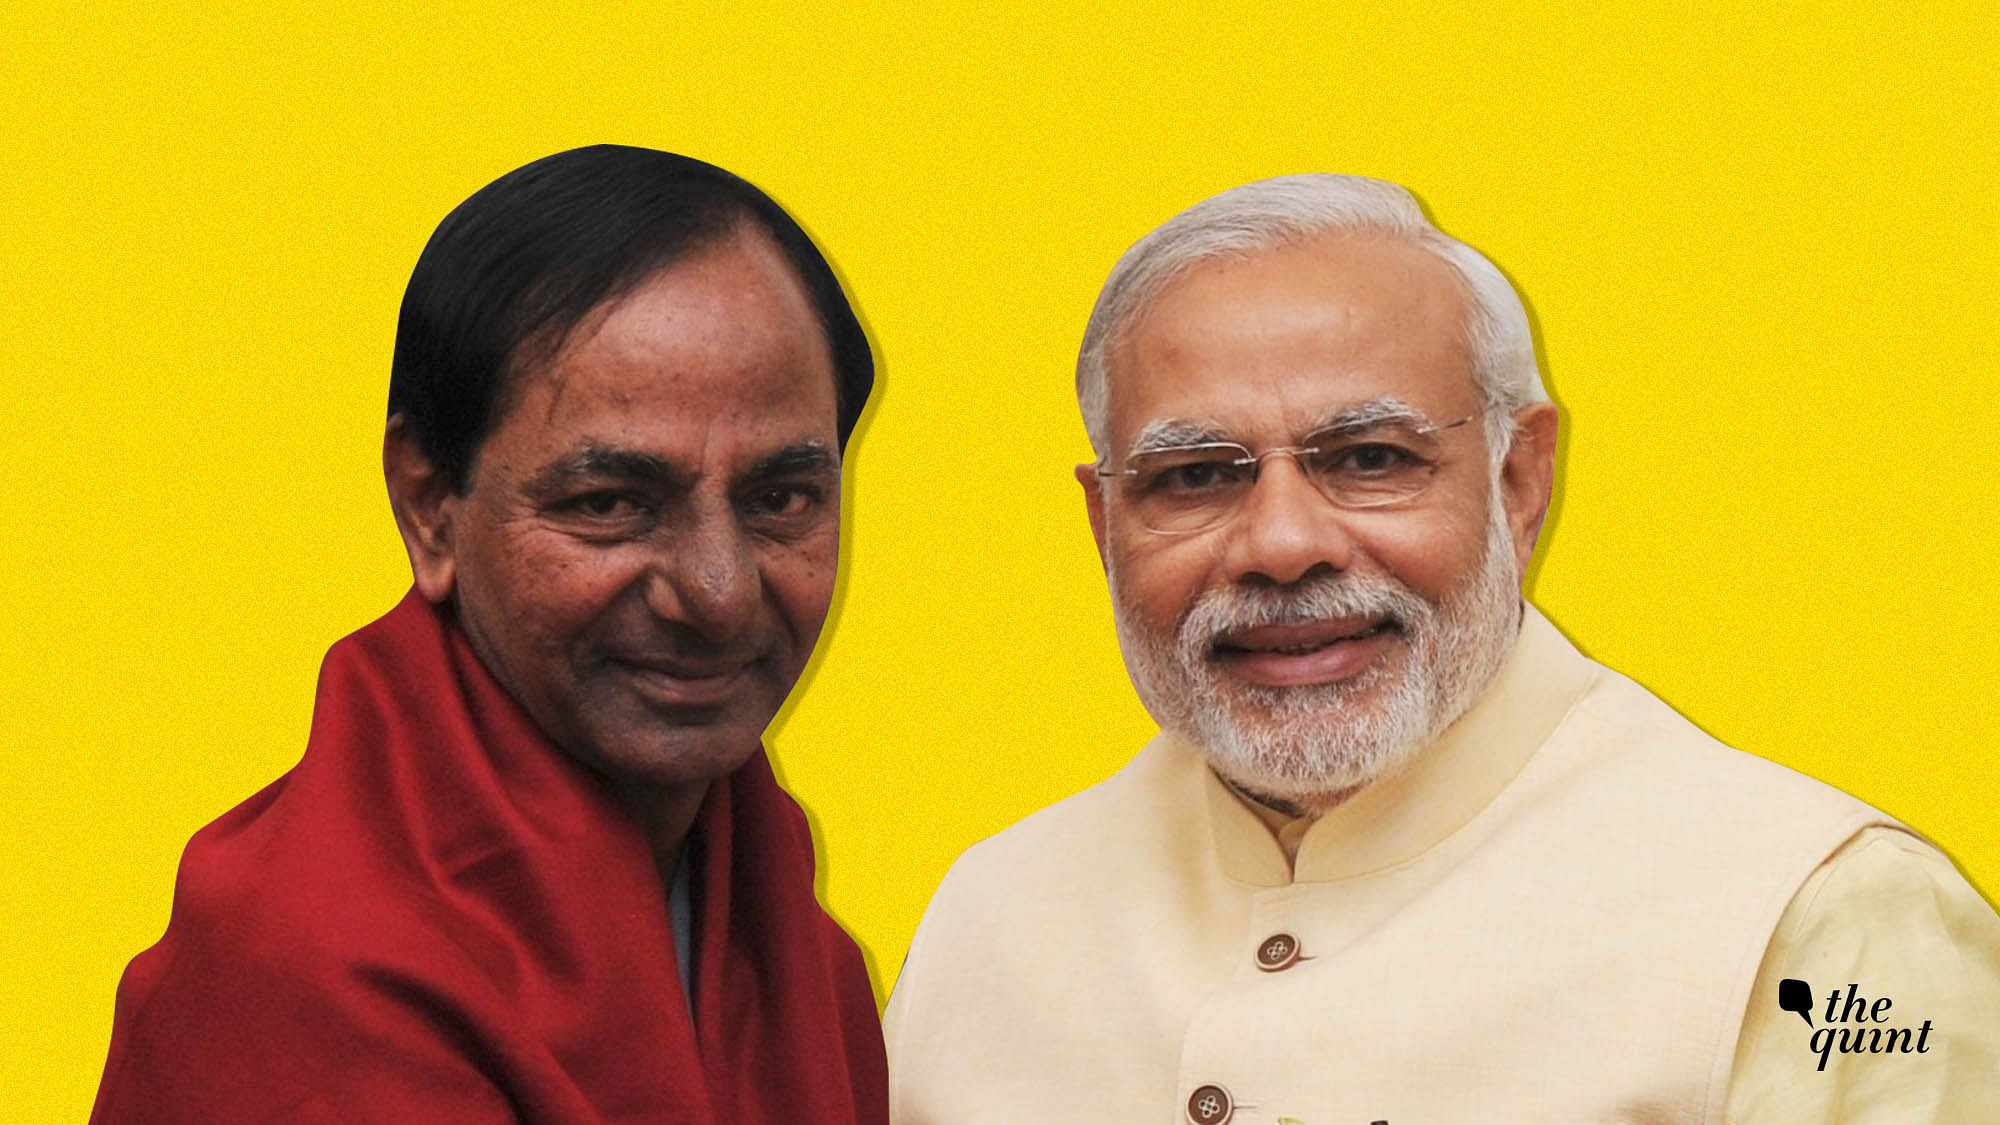 Image of Modi and KCR used for representational purposes.